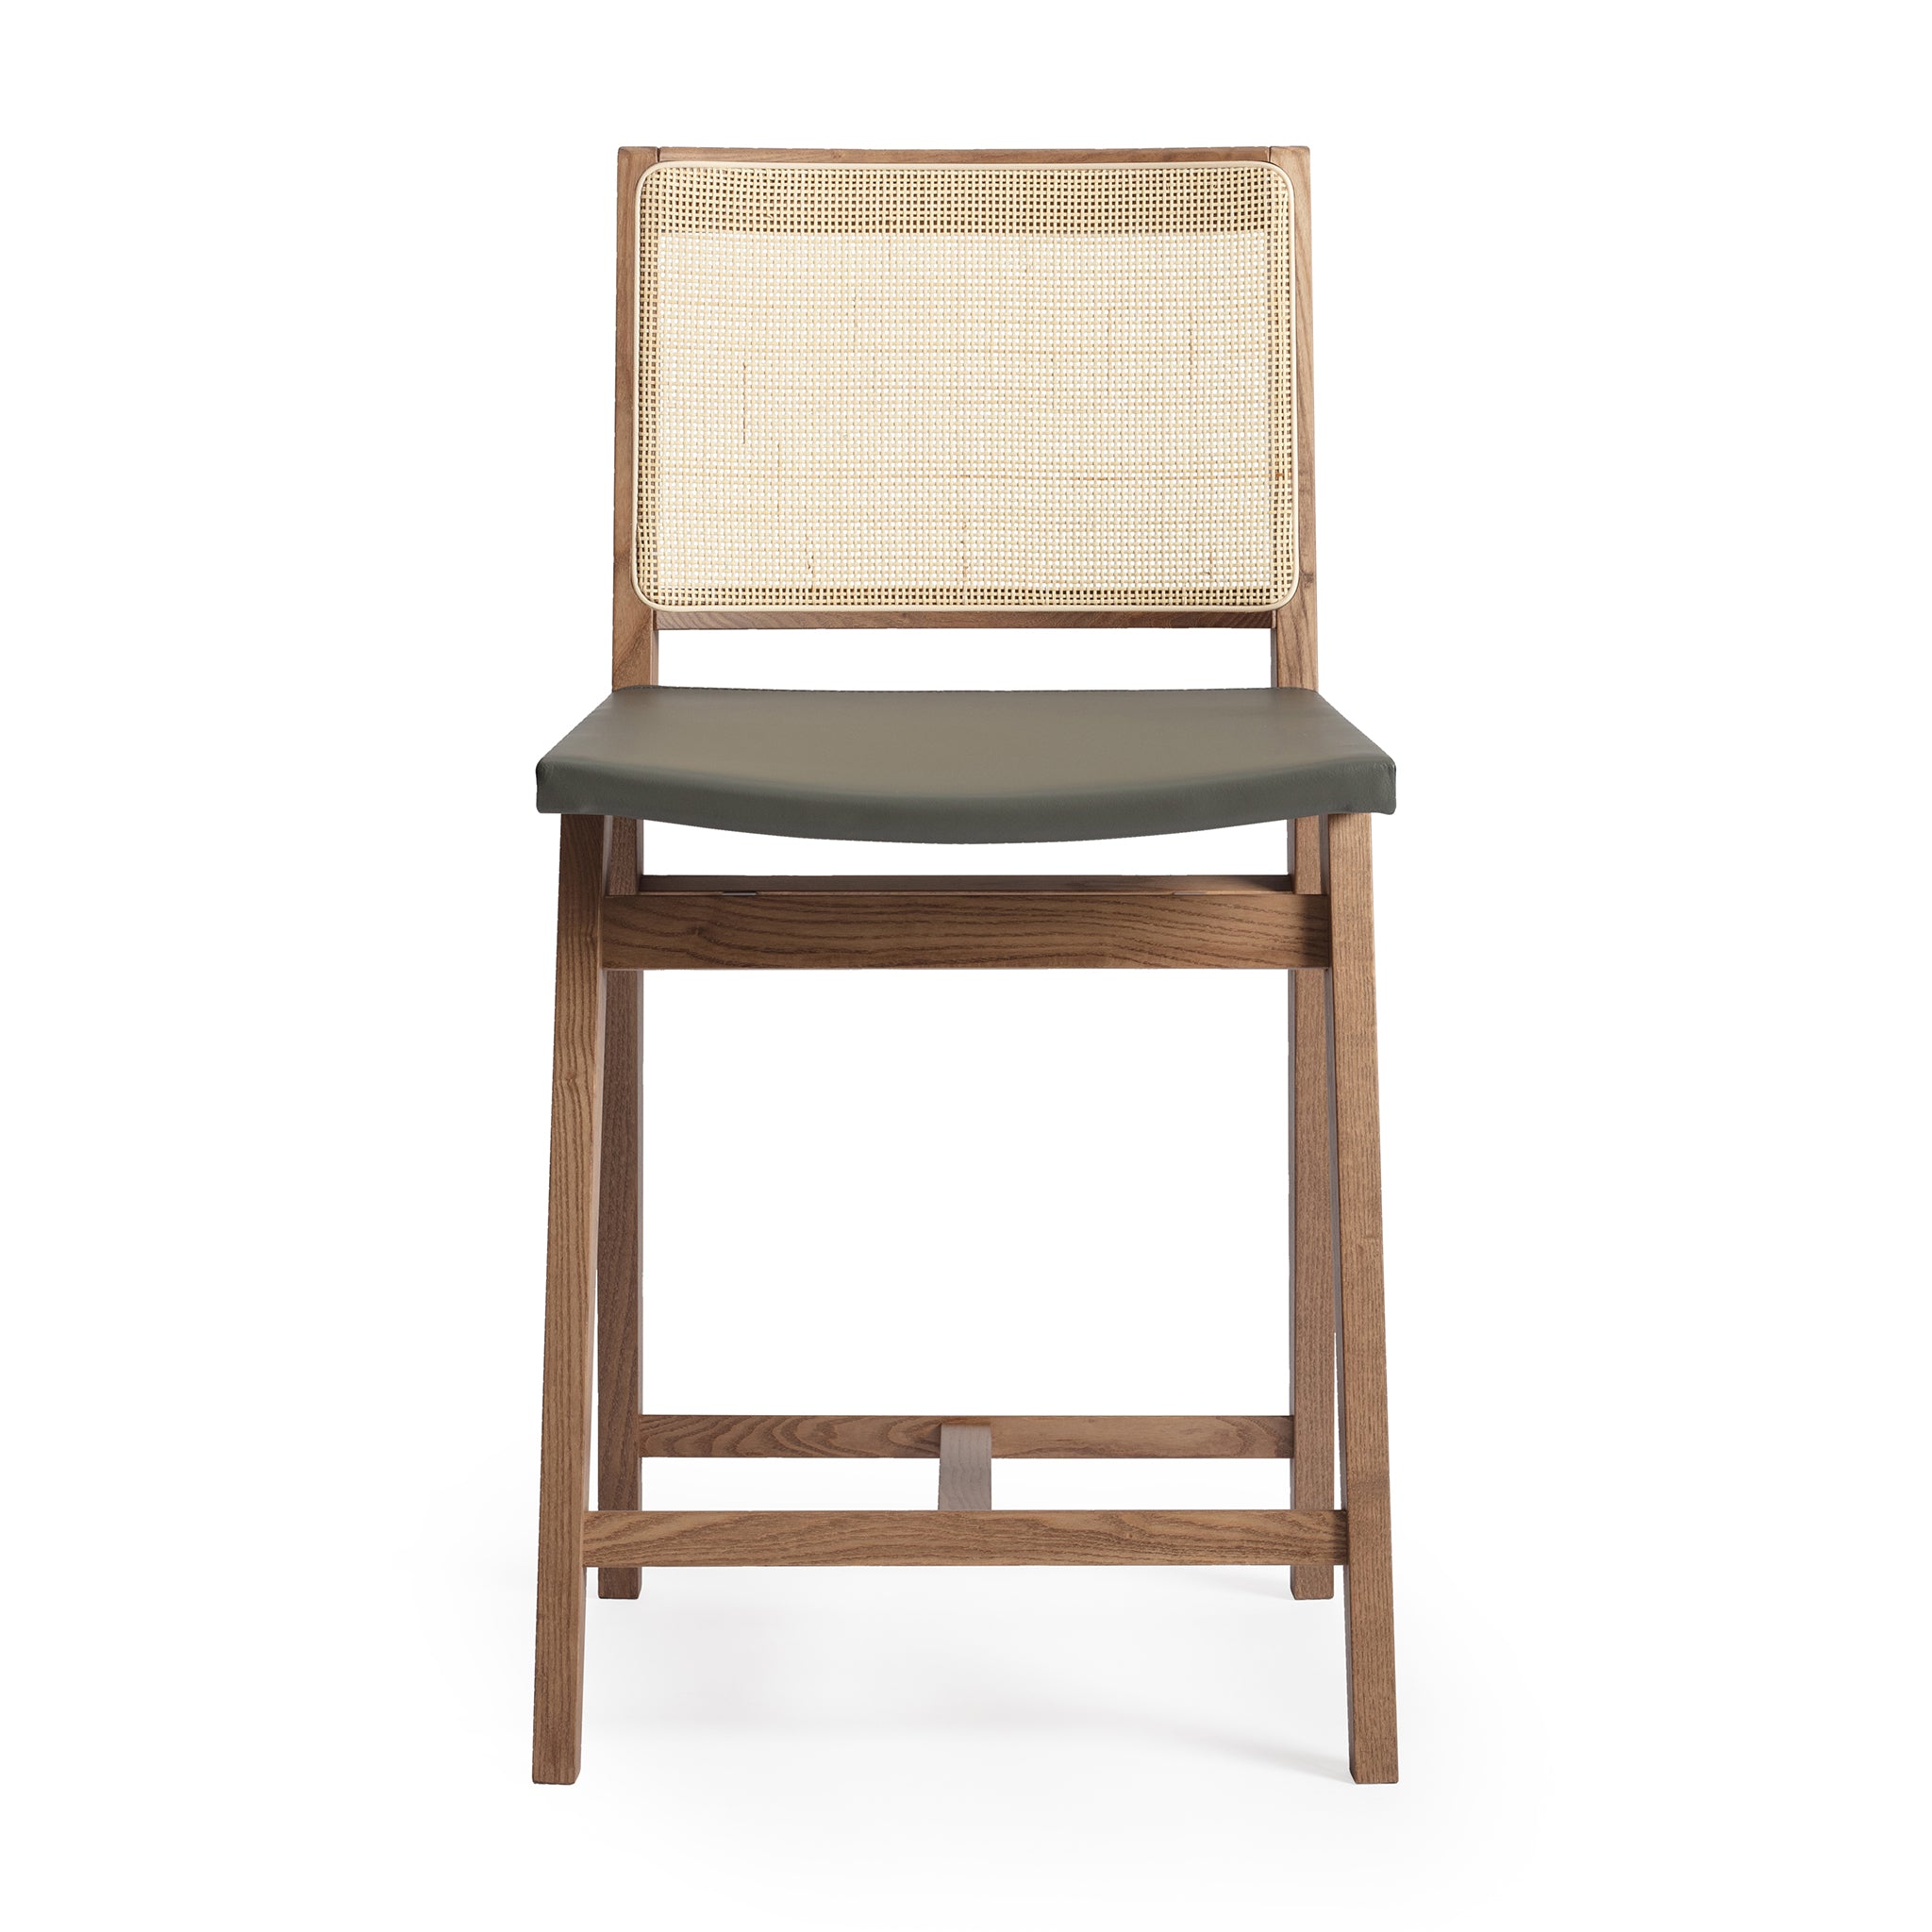 Front view of an Elye modern kitchen counter stool, walnut stained ash frame, square weave cane back, contract grade gray leather seat, produced by Klarel in Italy. #K43-2